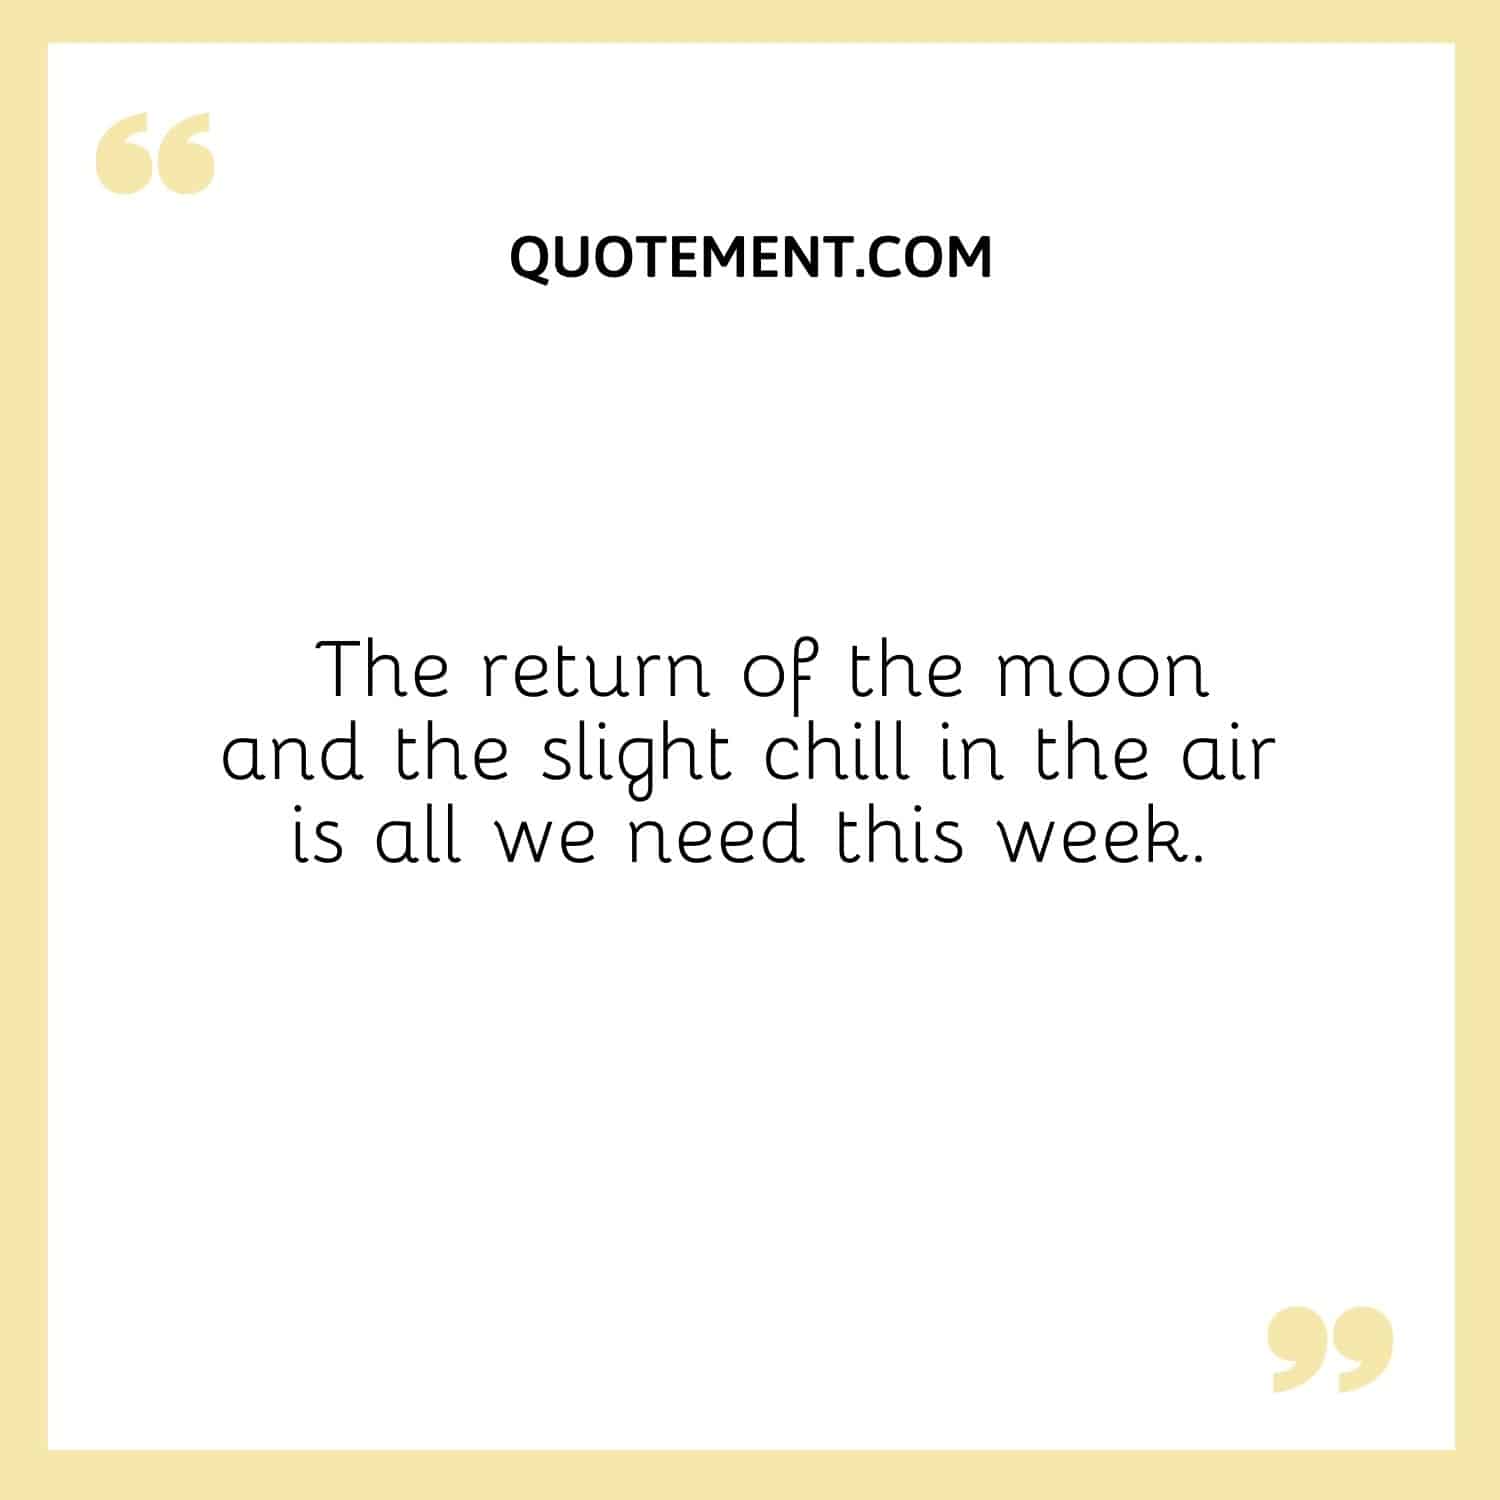 The return of the moon and the slight chill in the air is all we need this week.